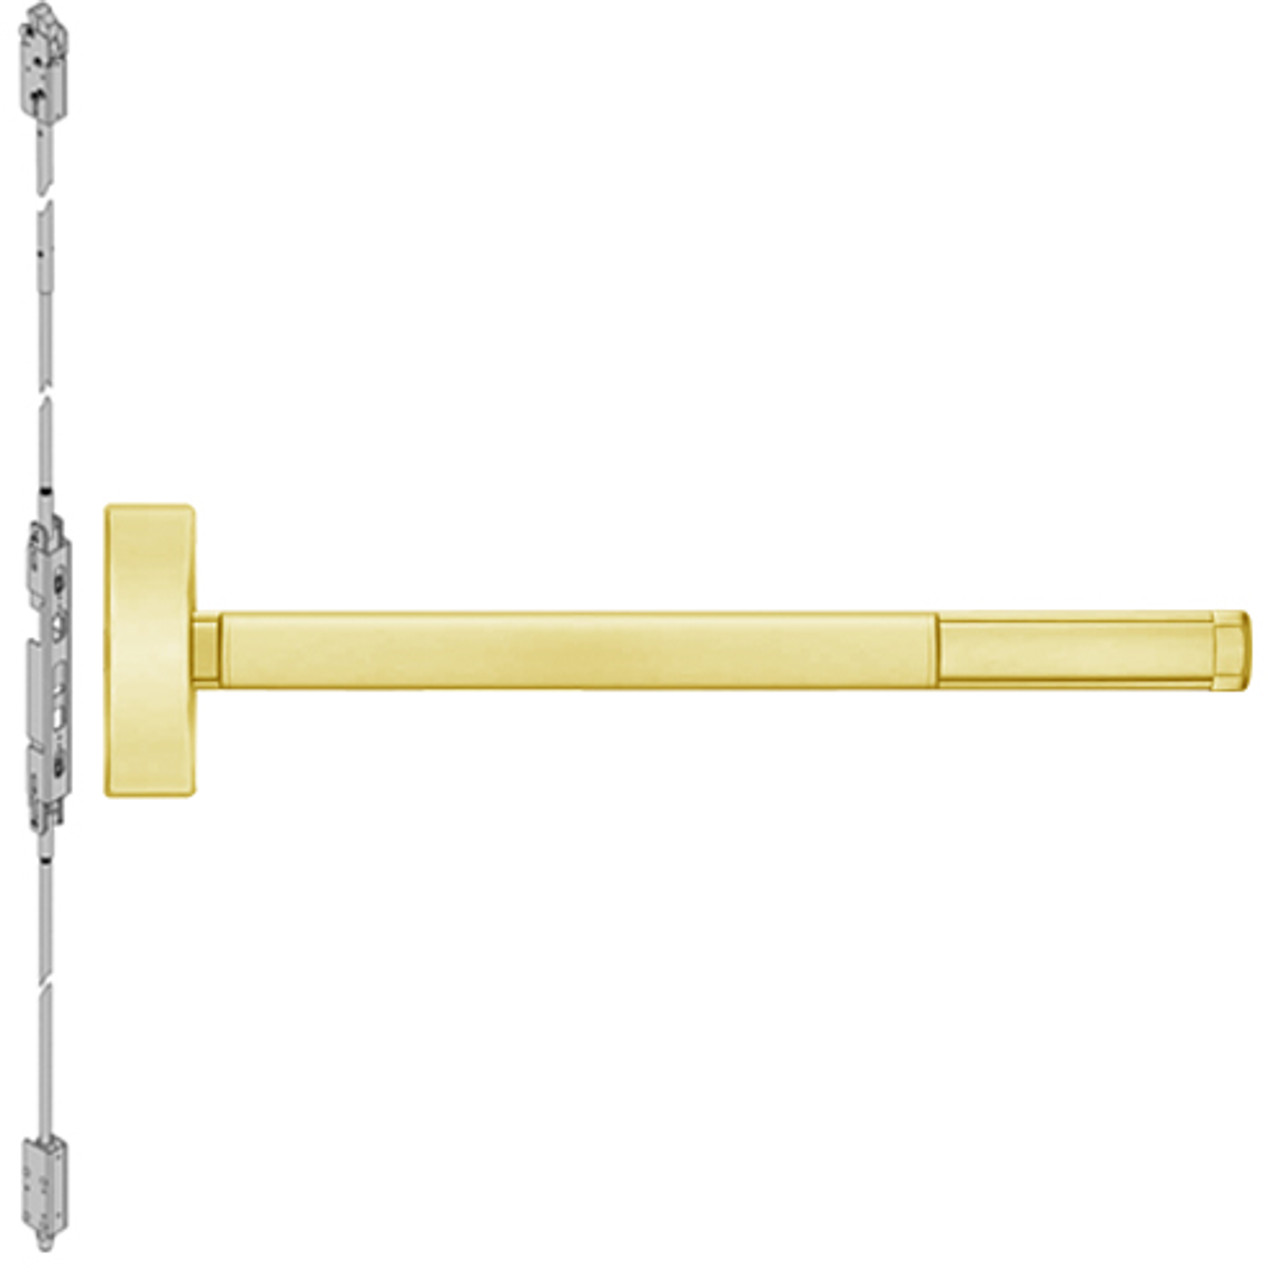 FL2802-605-36 PHI 2800 Series Fire Rated Concealed Vertical Rod Exit Device Prepped for Dummy Trim in Bright Brass Finish